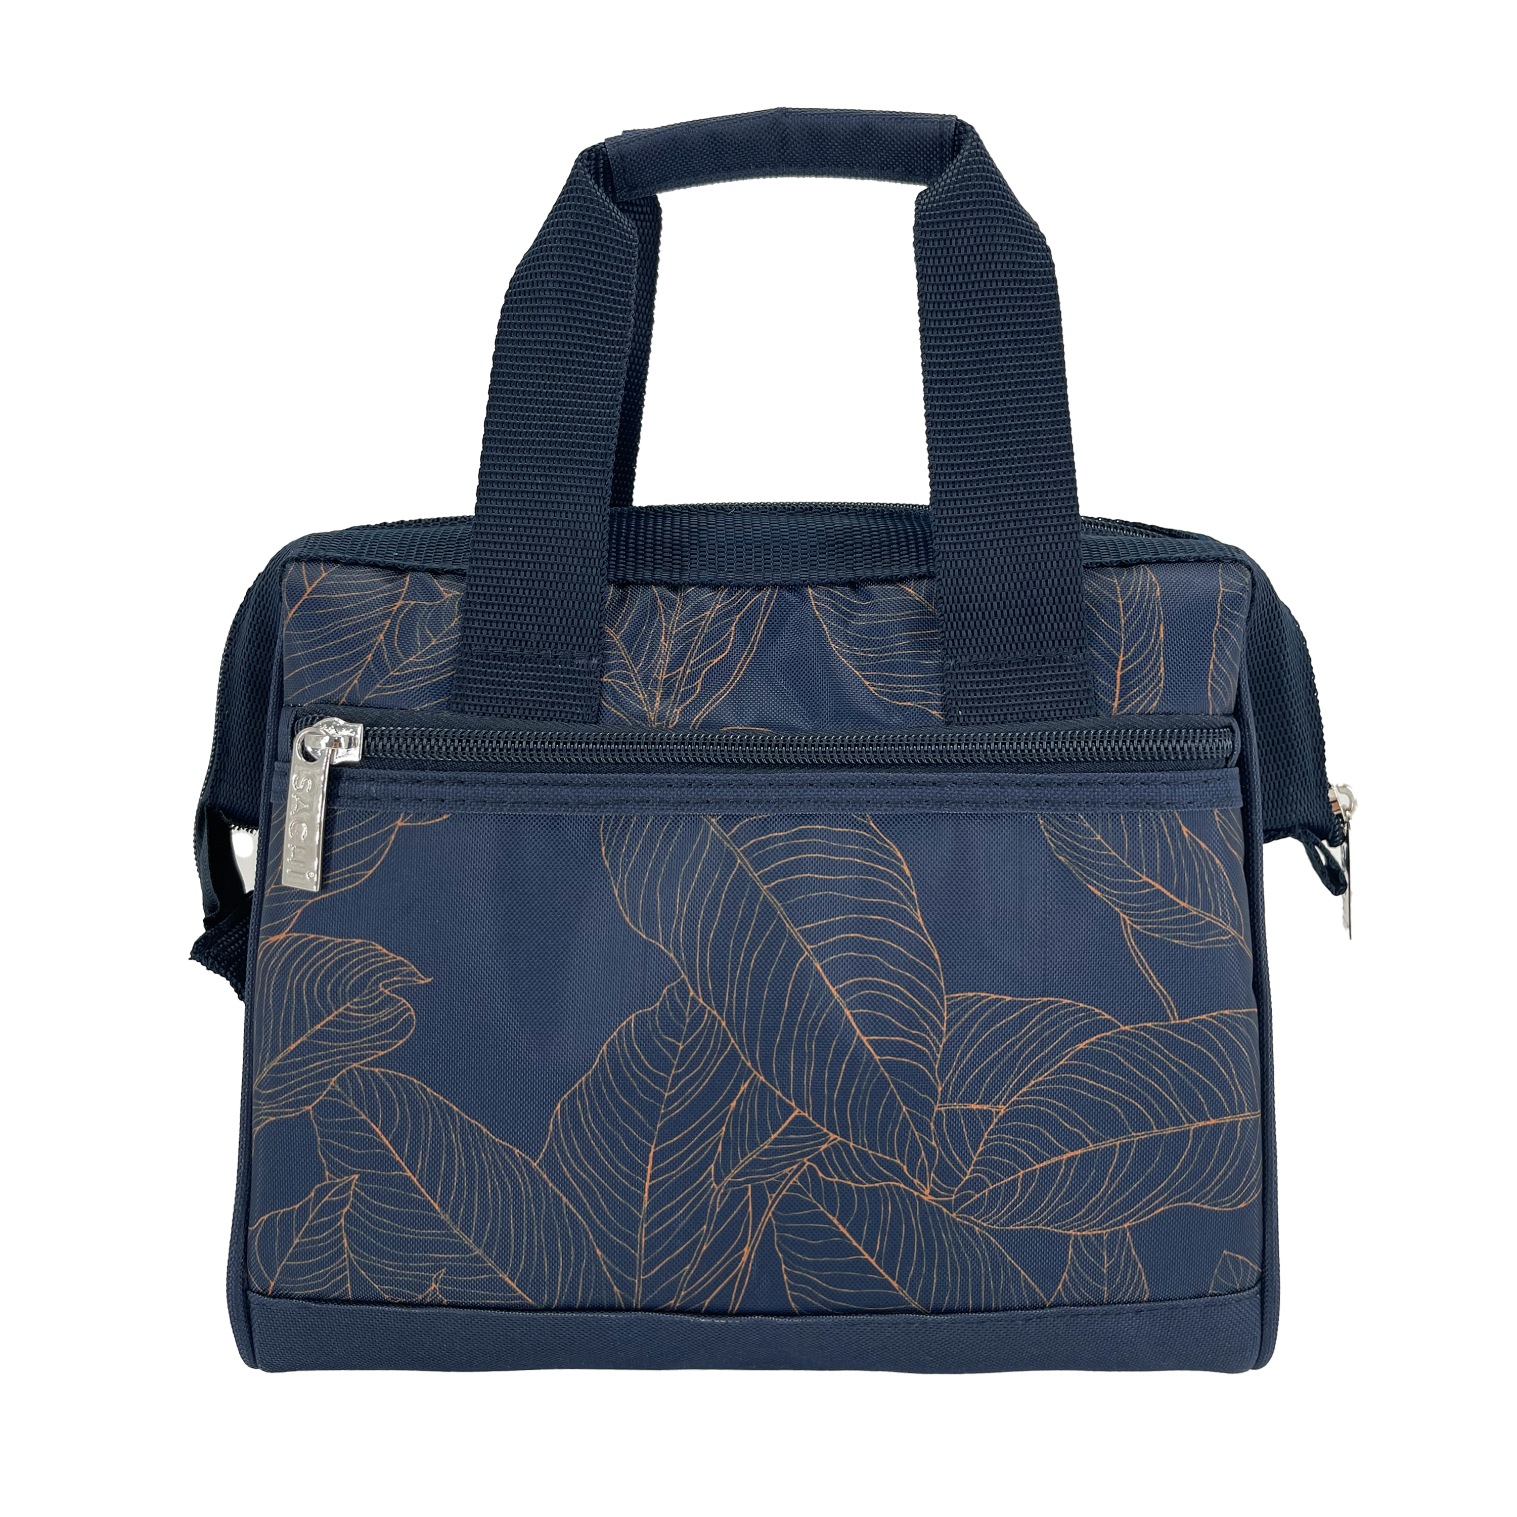 Sachi Style 34 Insulated Lunch Bag Navy Leaves